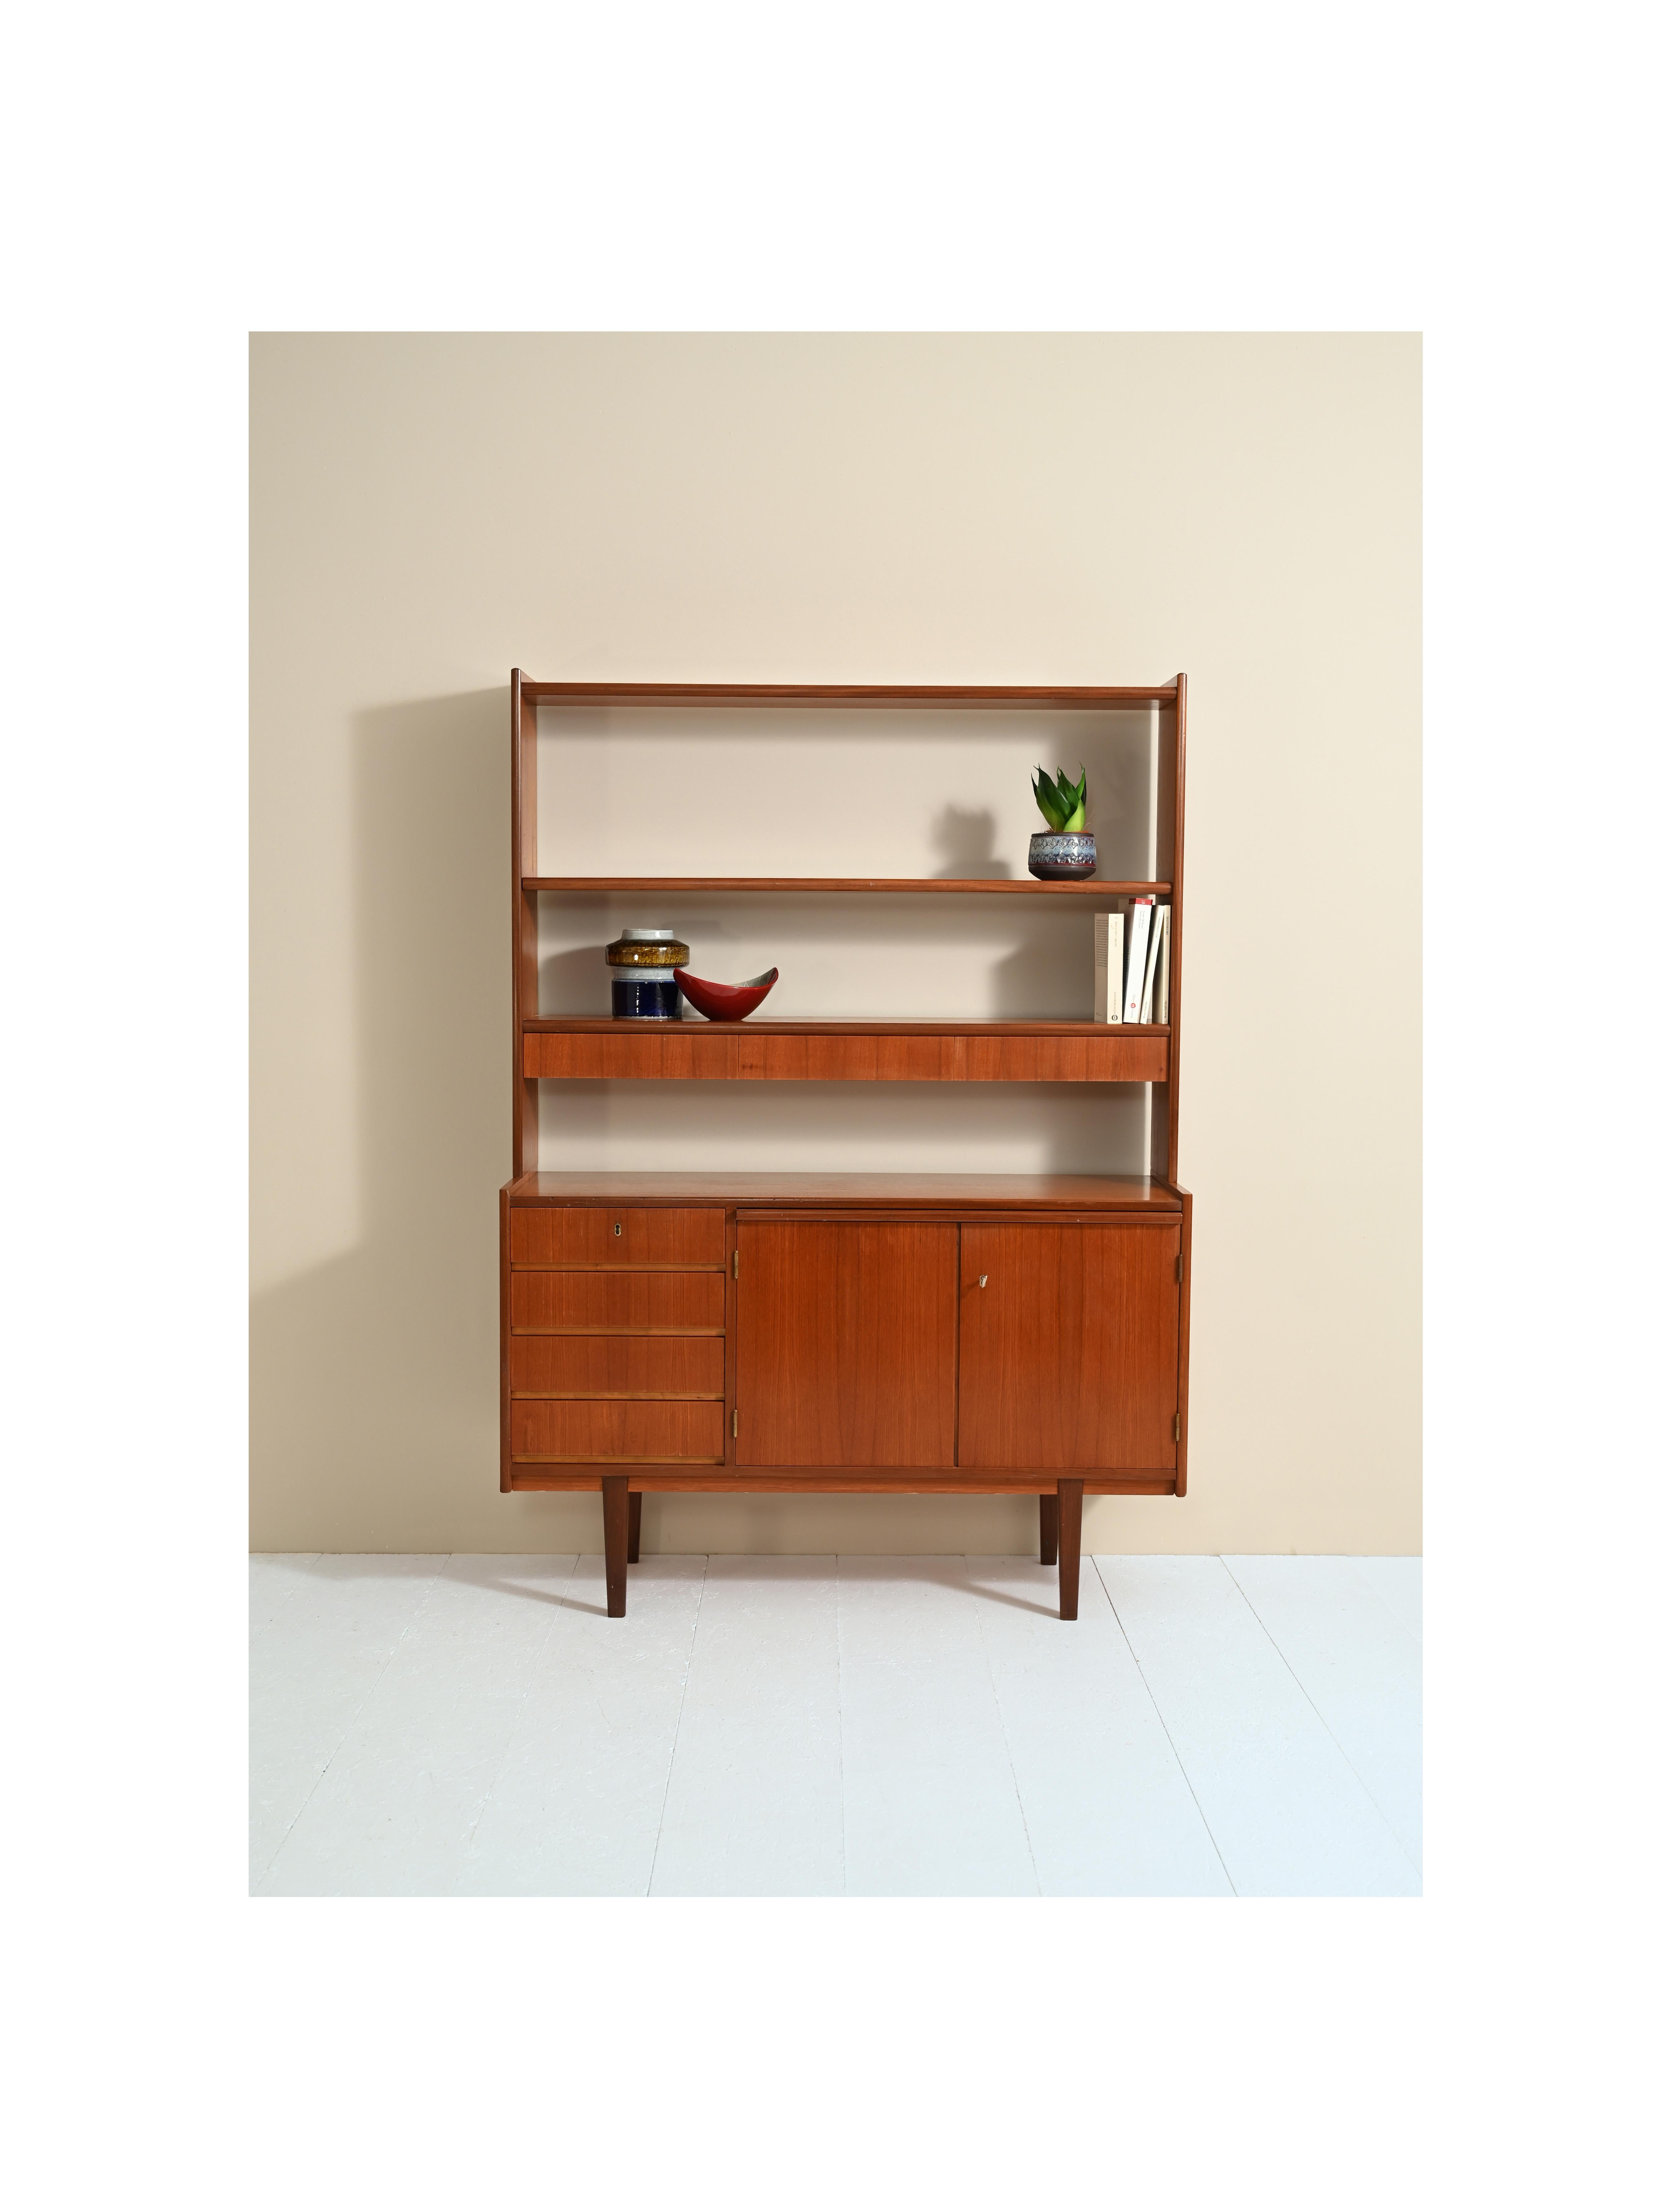 Danish teak cabinet from the 1960s.
The upper part of the bookcase has an adjustable-height shelf and a shelf with drawers. The lower part is a proper sideboard with drawers and a storage compartment. There is also a pull-out shelf that is useful